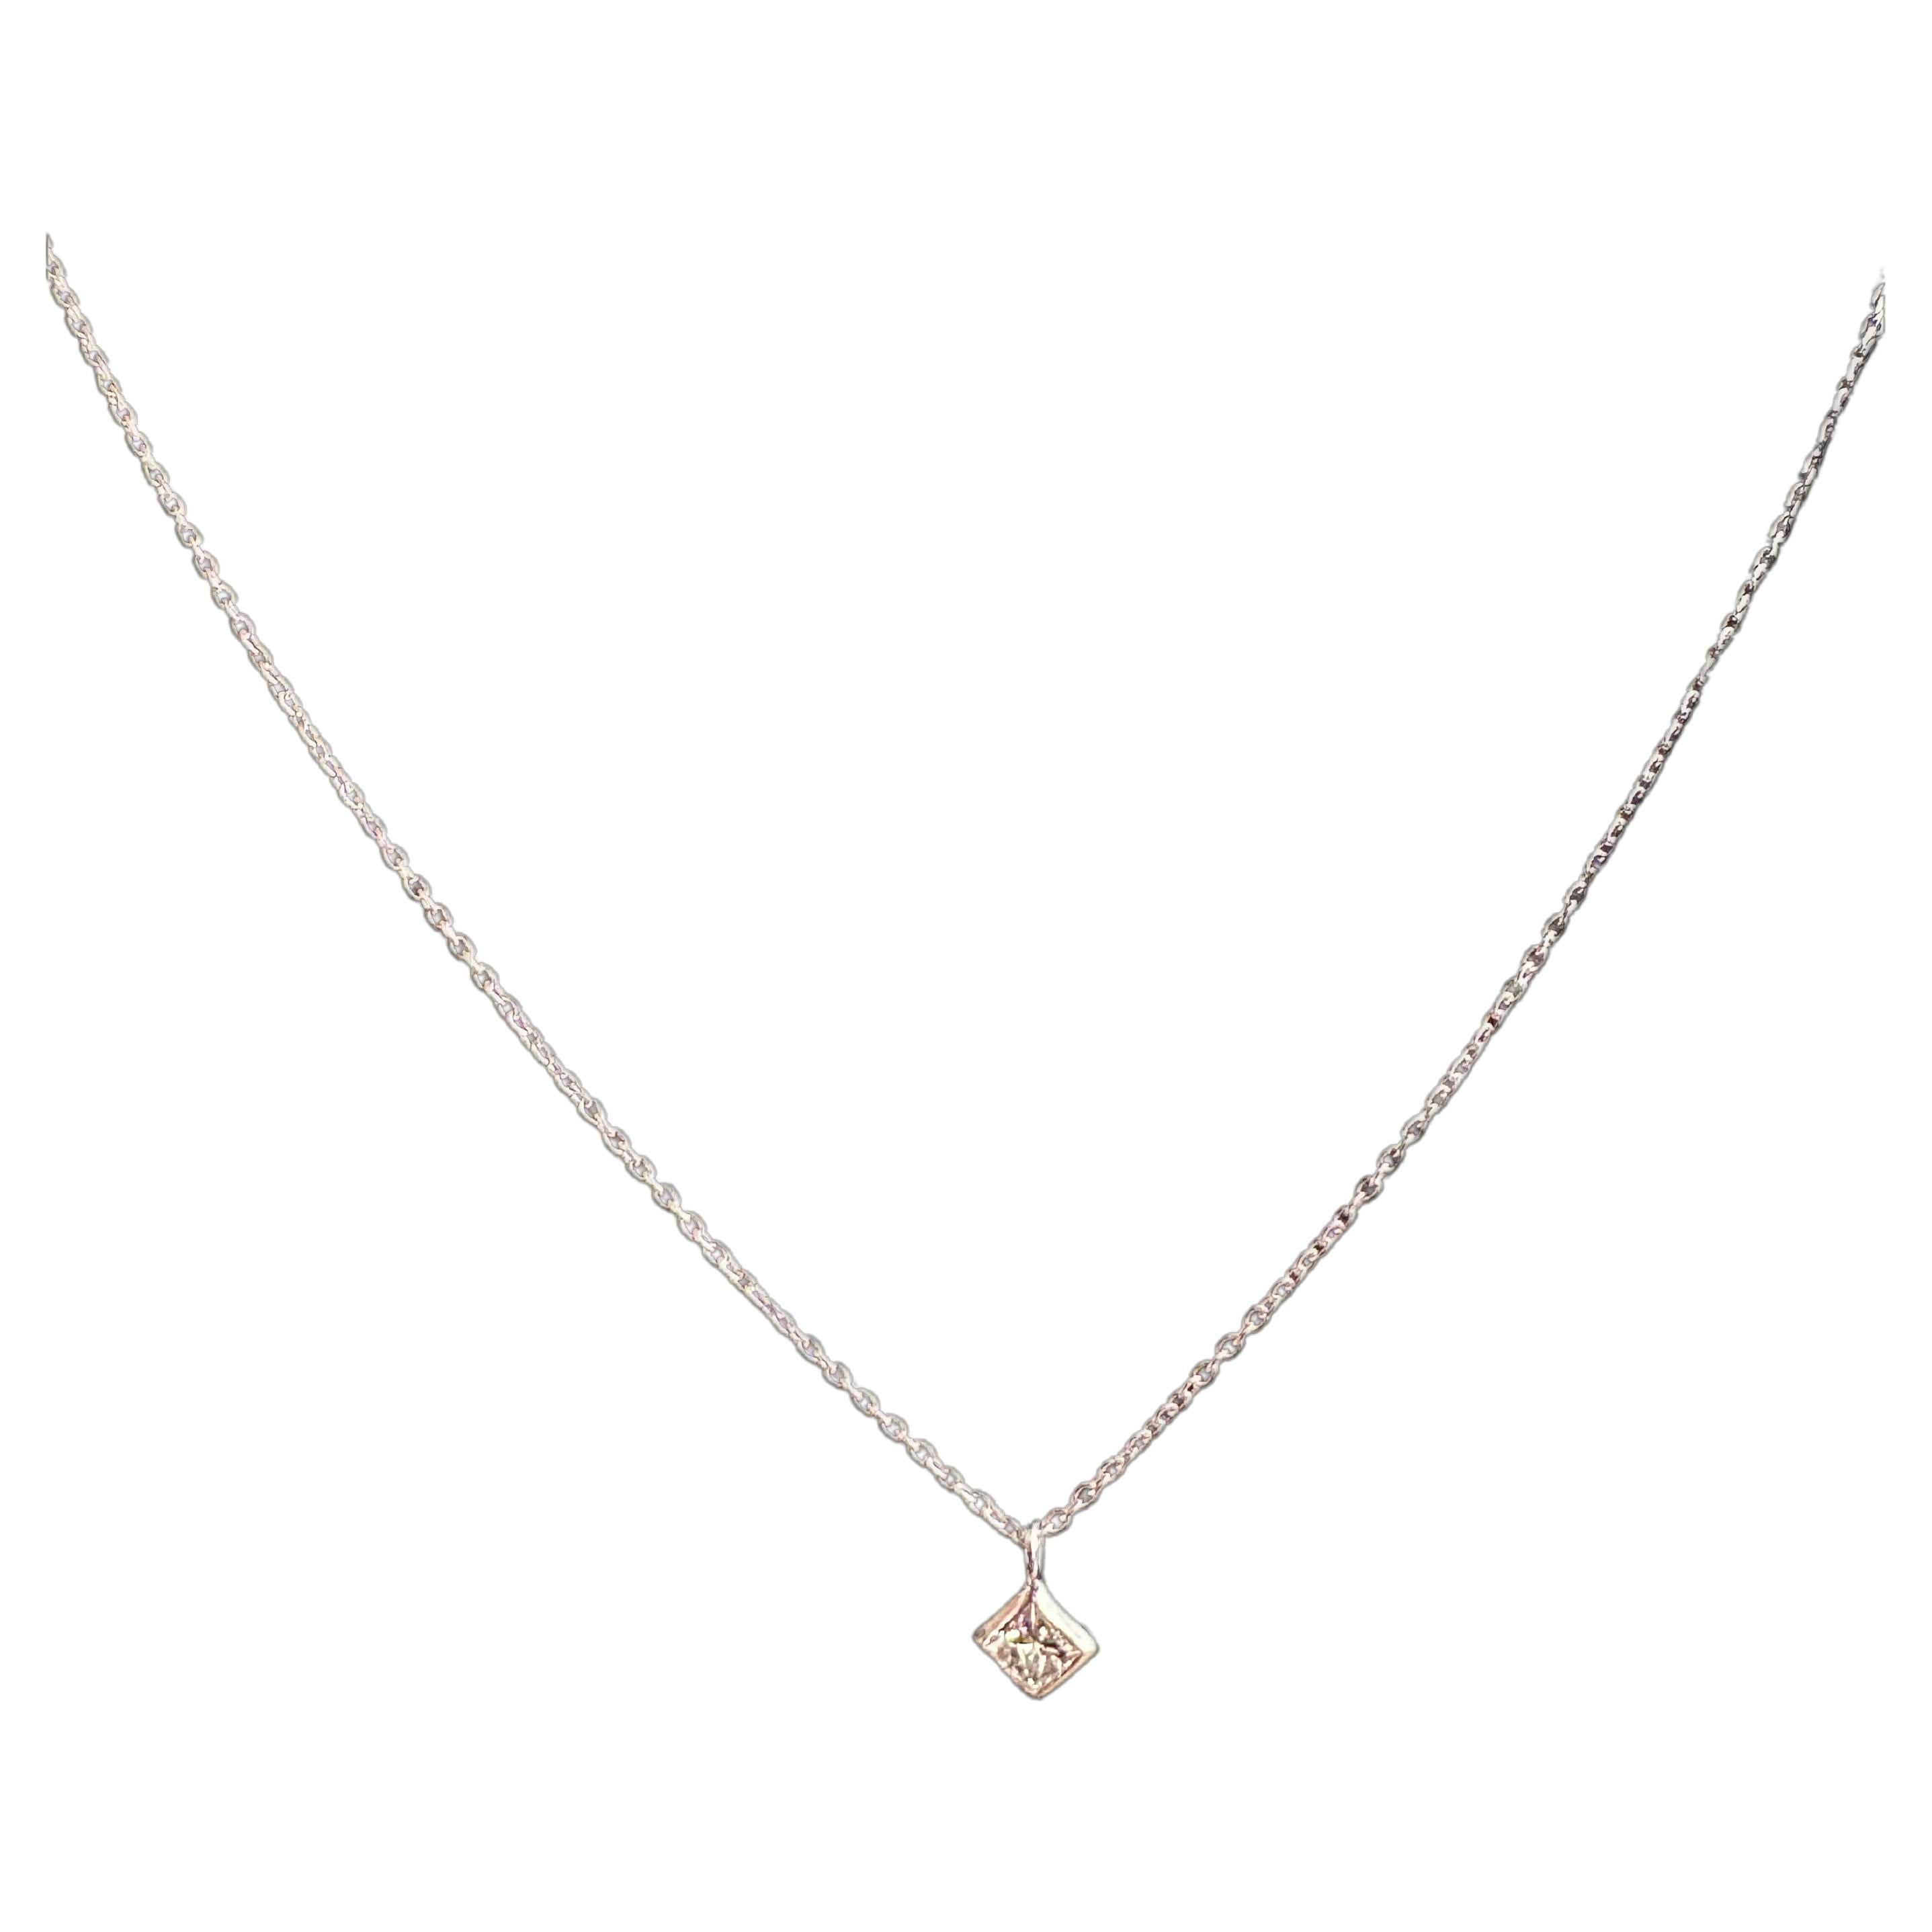 Dainty, sweet, cost effective. Perfect for daily wear!